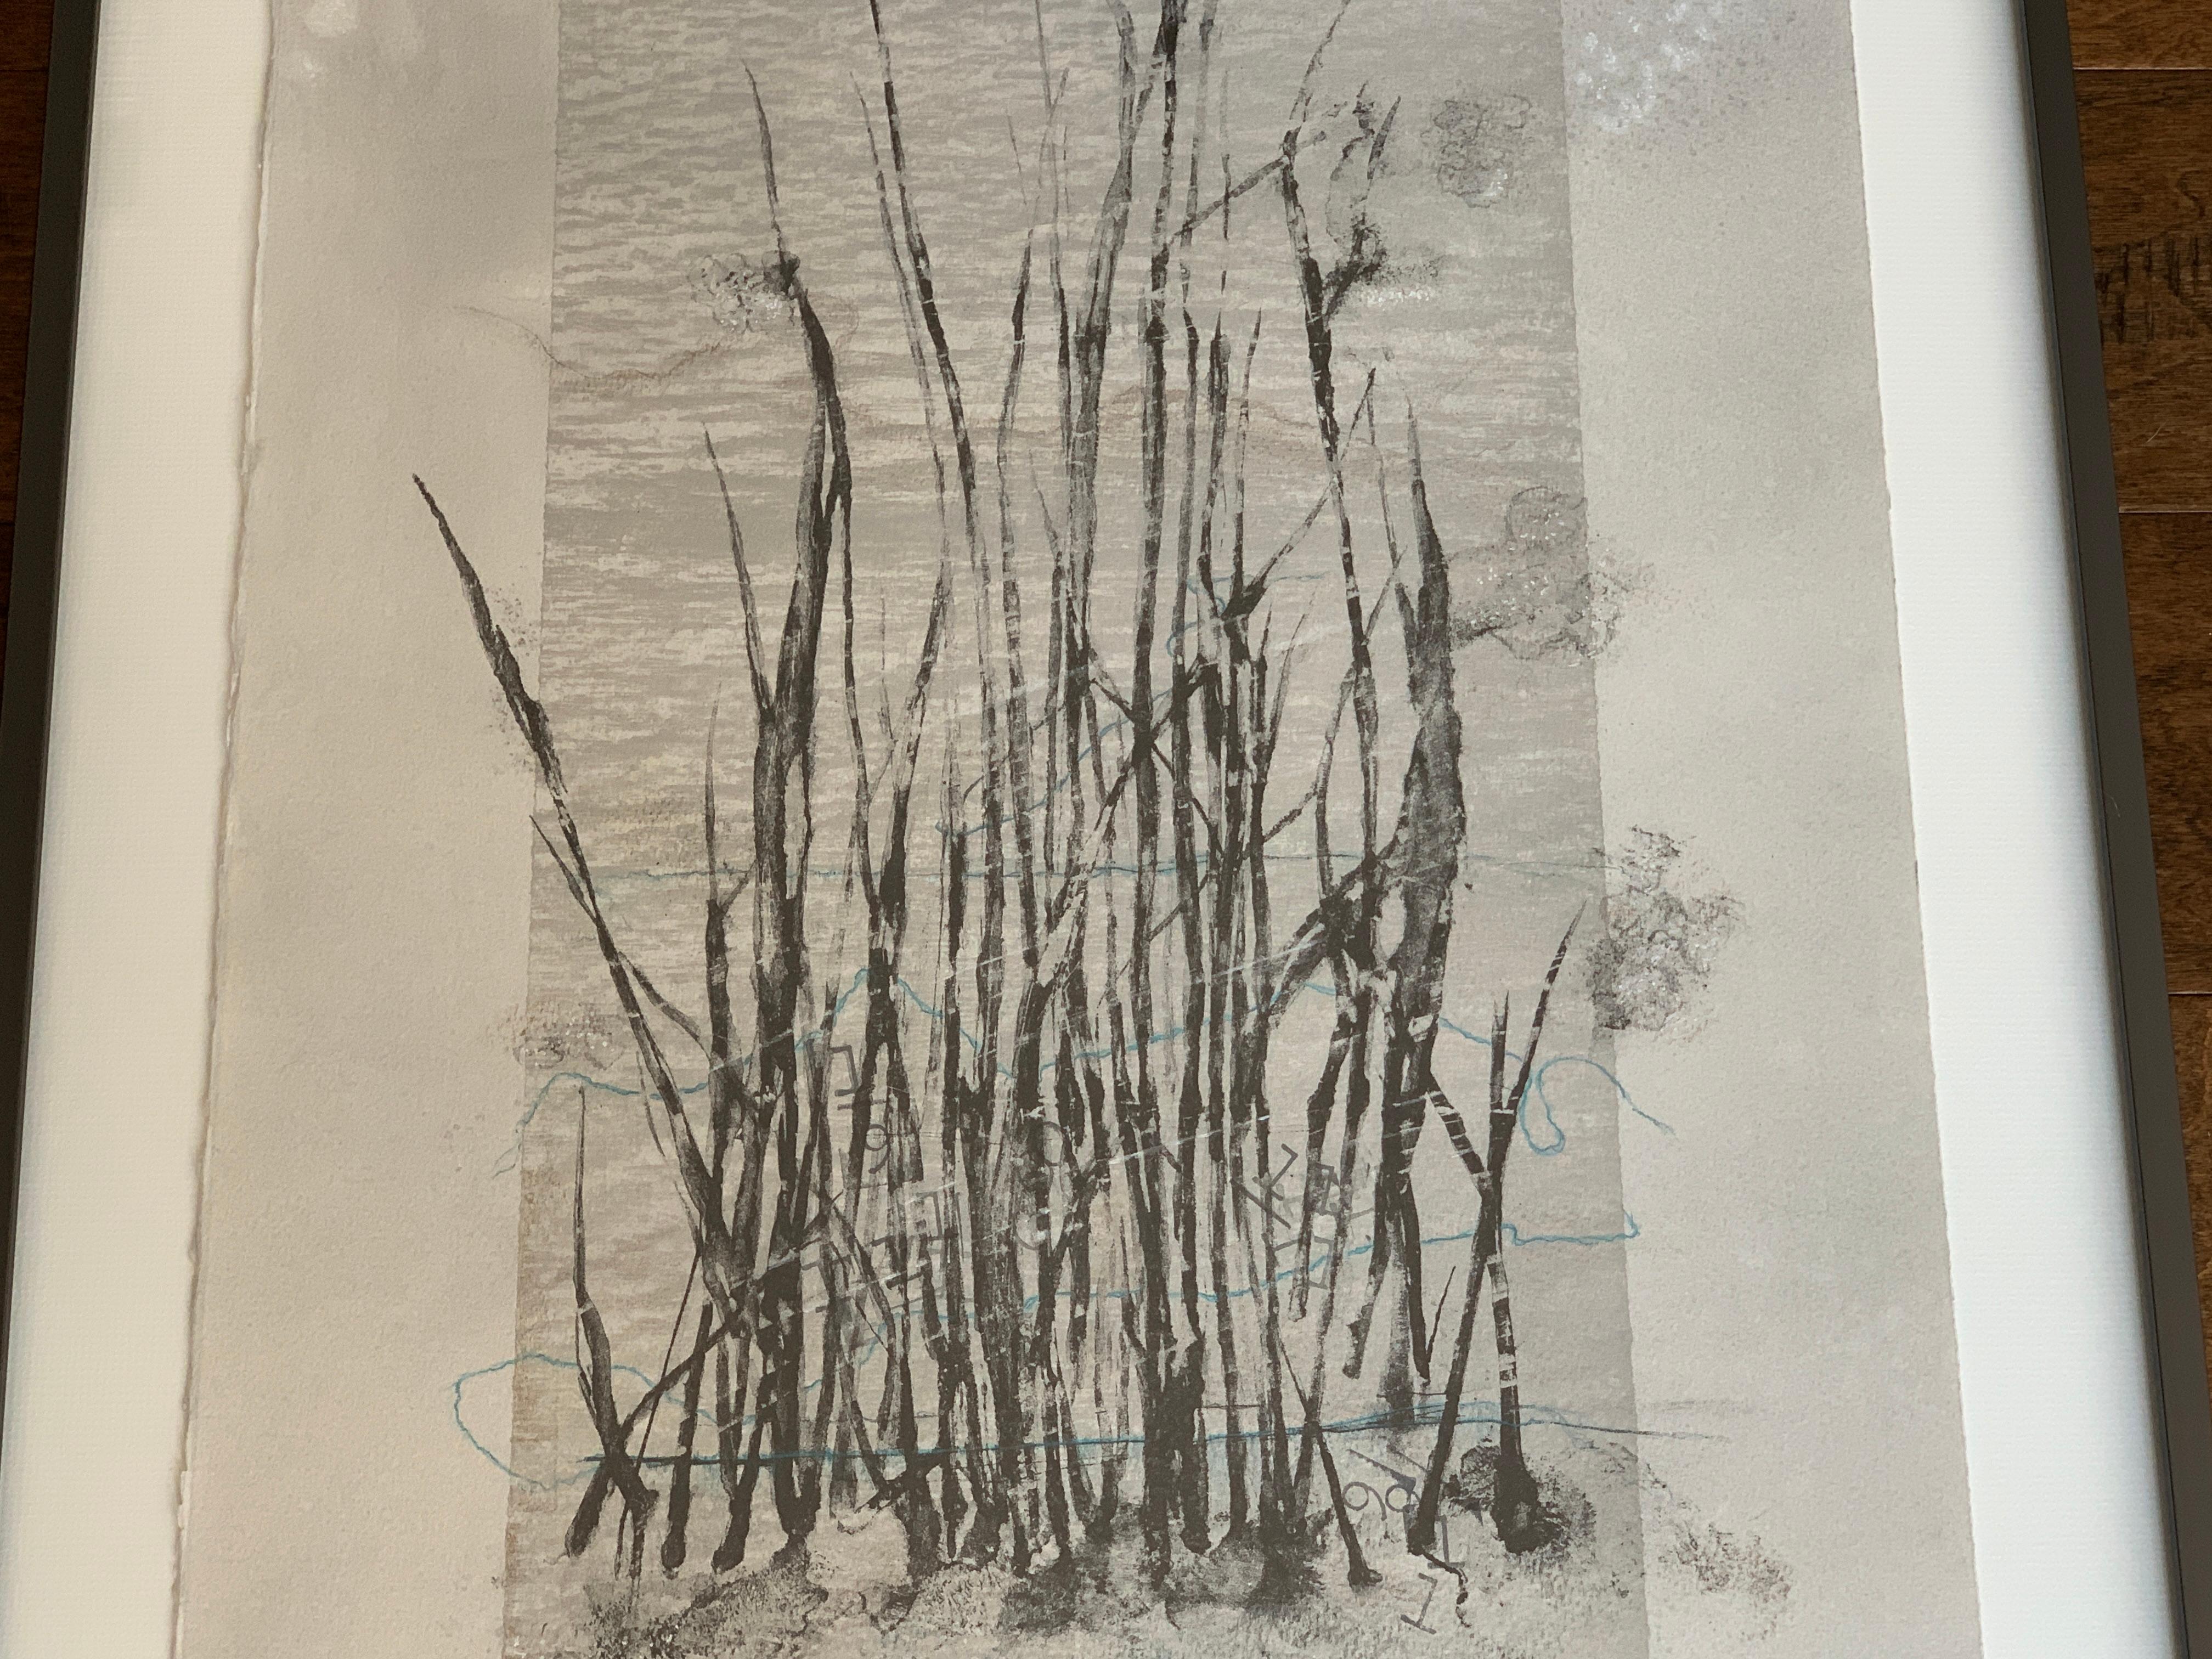 Brushed 'Bog Grass' 1/4 Photolithograph Mixed-Media by Laurie Carnohan, 2019